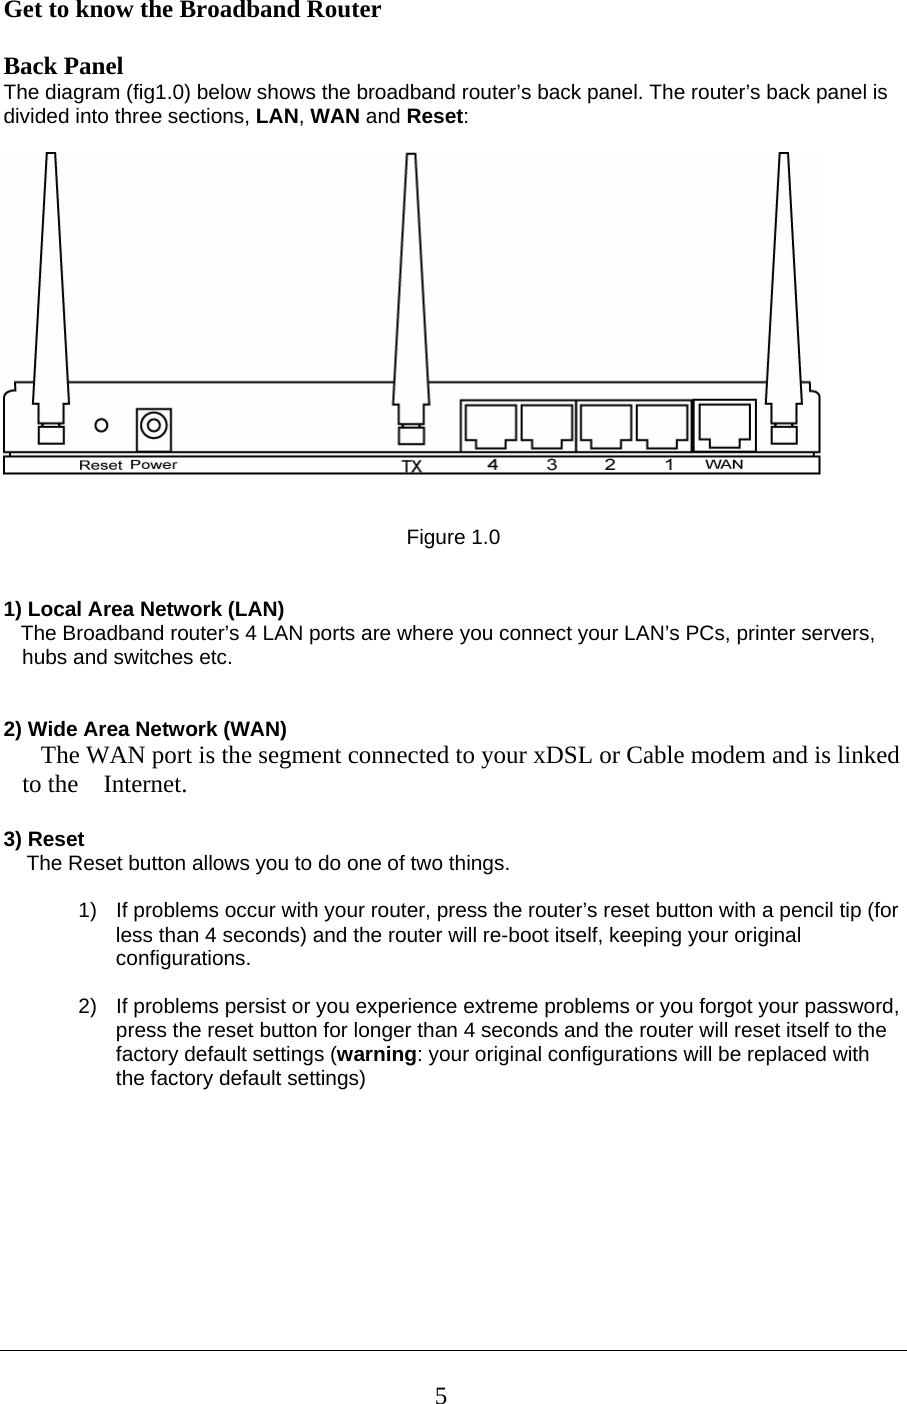 Get to know the Broadband Router   Back Panel The diagram (fig1.0) below shows the broadband router’s back panel. The router’s back panel is divided into three sections, LAN, WAN and Reset:      Figure 1.0   1) Local Area Network (LAN)     The Broadband router’s 4 LAN ports are where you connect your LAN’s PCs, printer servers, hubs and switches etc.    2) Wide Area Network (WAN)    The WAN port is the segment connected to your xDSL or Cable modem and is linked to the    Internet.  3) Reset     The Reset button allows you to do one of two things.  1)  If problems occur with your router, press the router’s reset button with a pencil tip (for less than 4 seconds) and the router will re-boot itself, keeping your original configurations.  2)  If problems persist or you experience extreme problems or you forgot your password, press the reset button for longer than 4 seconds and the router will reset itself to the factory default settings (warning: your original configurations will be replaced with the factory default settings)          5